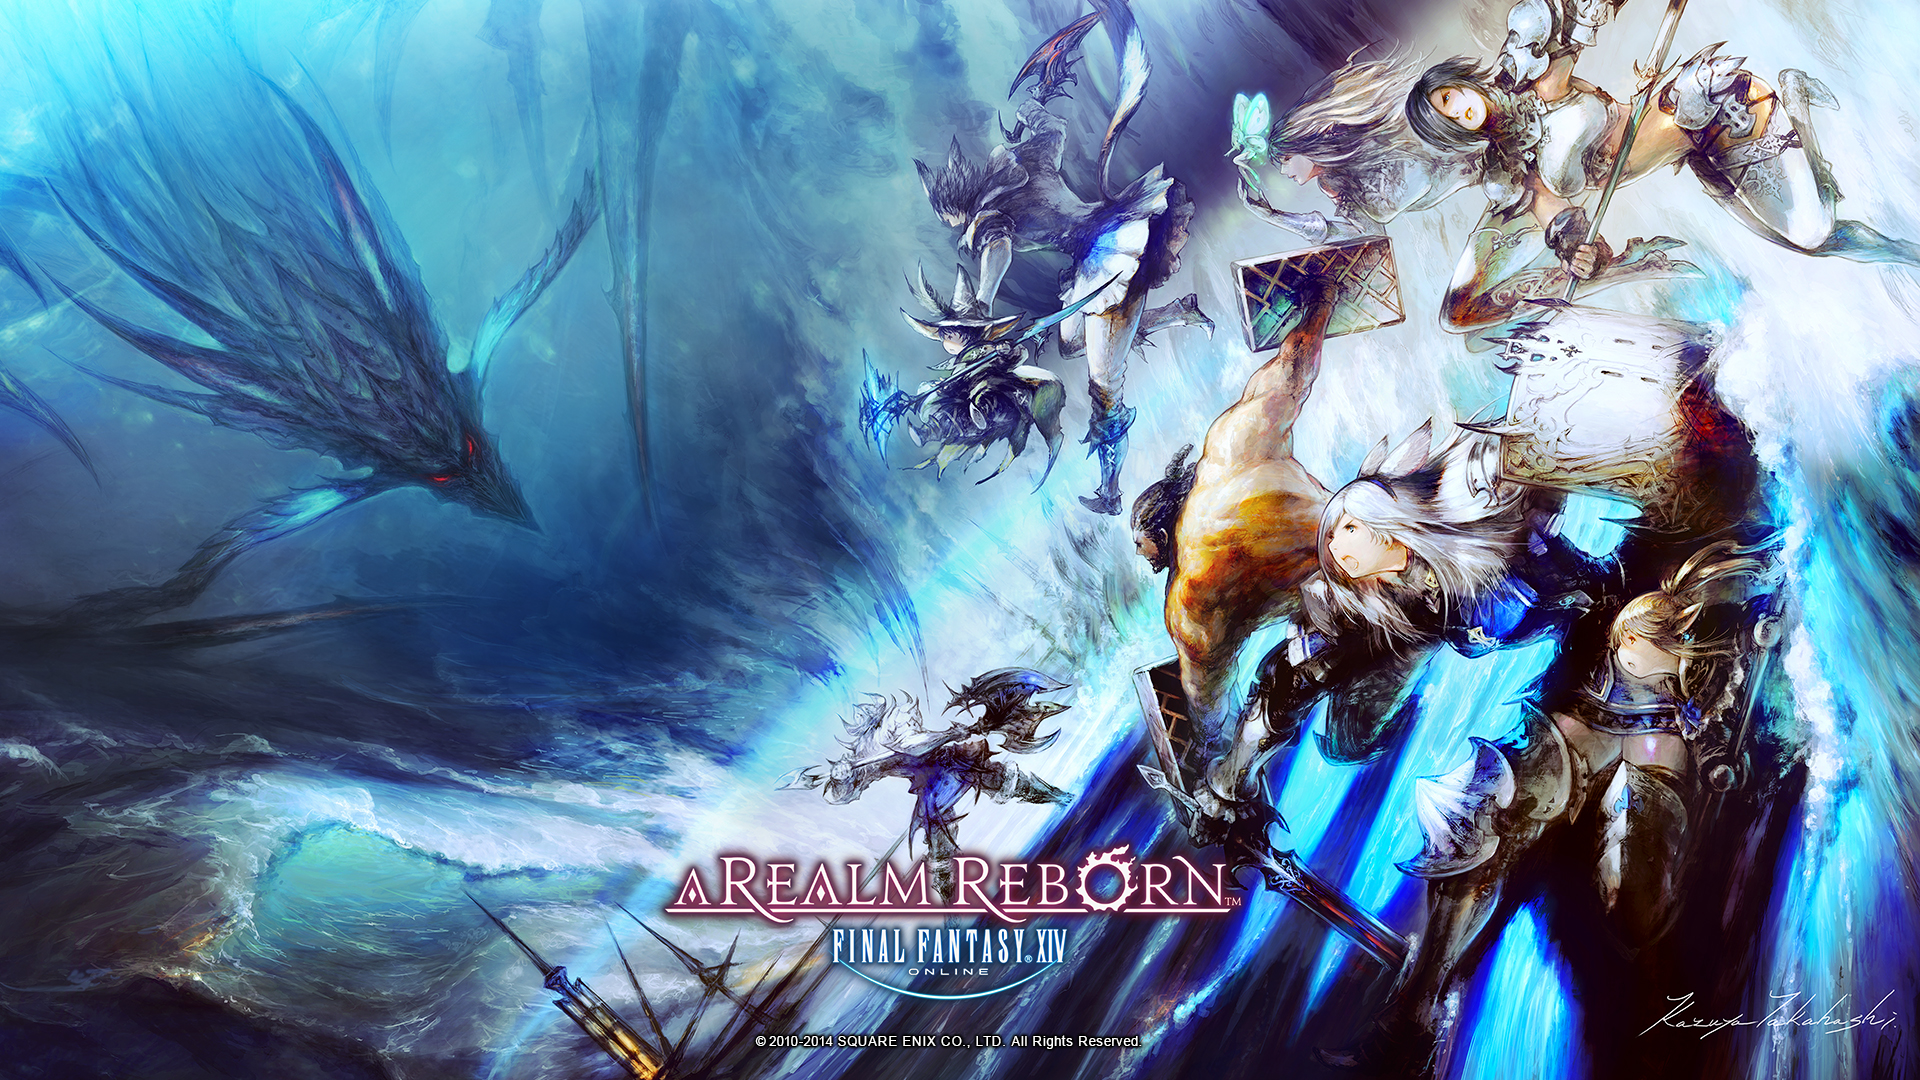 Final Fantasy Xiv Ps4 Open Beta Times And Servers